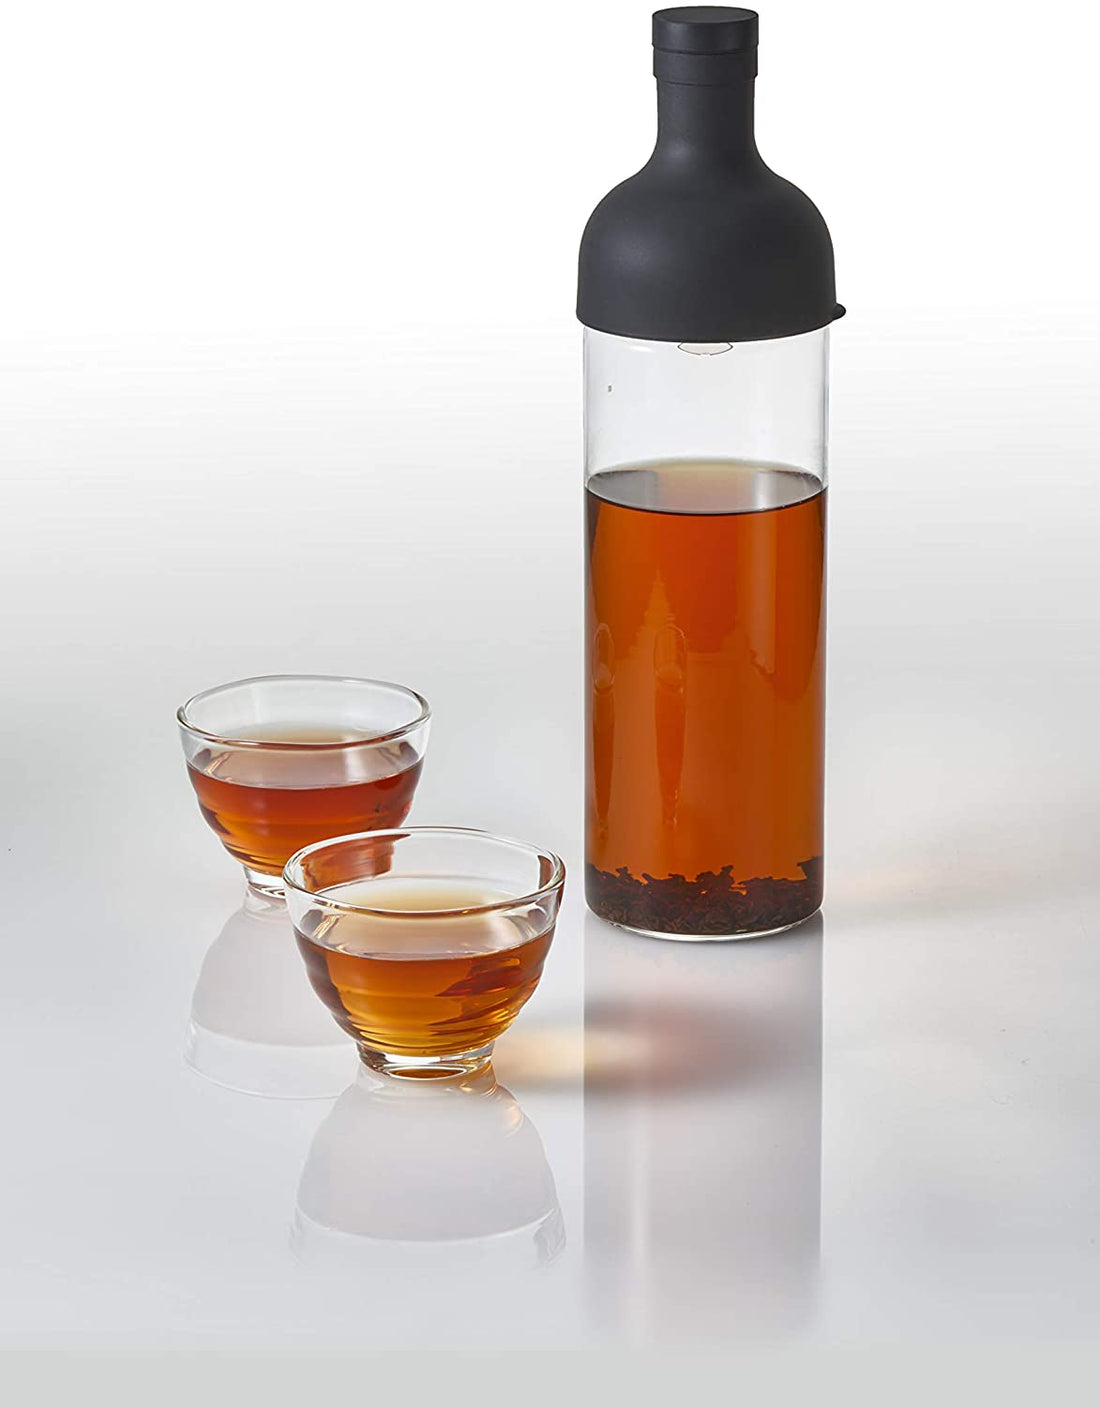 Hario, Hario Filter in Bottle and Tea Glass Set - Black, Redber Coffee